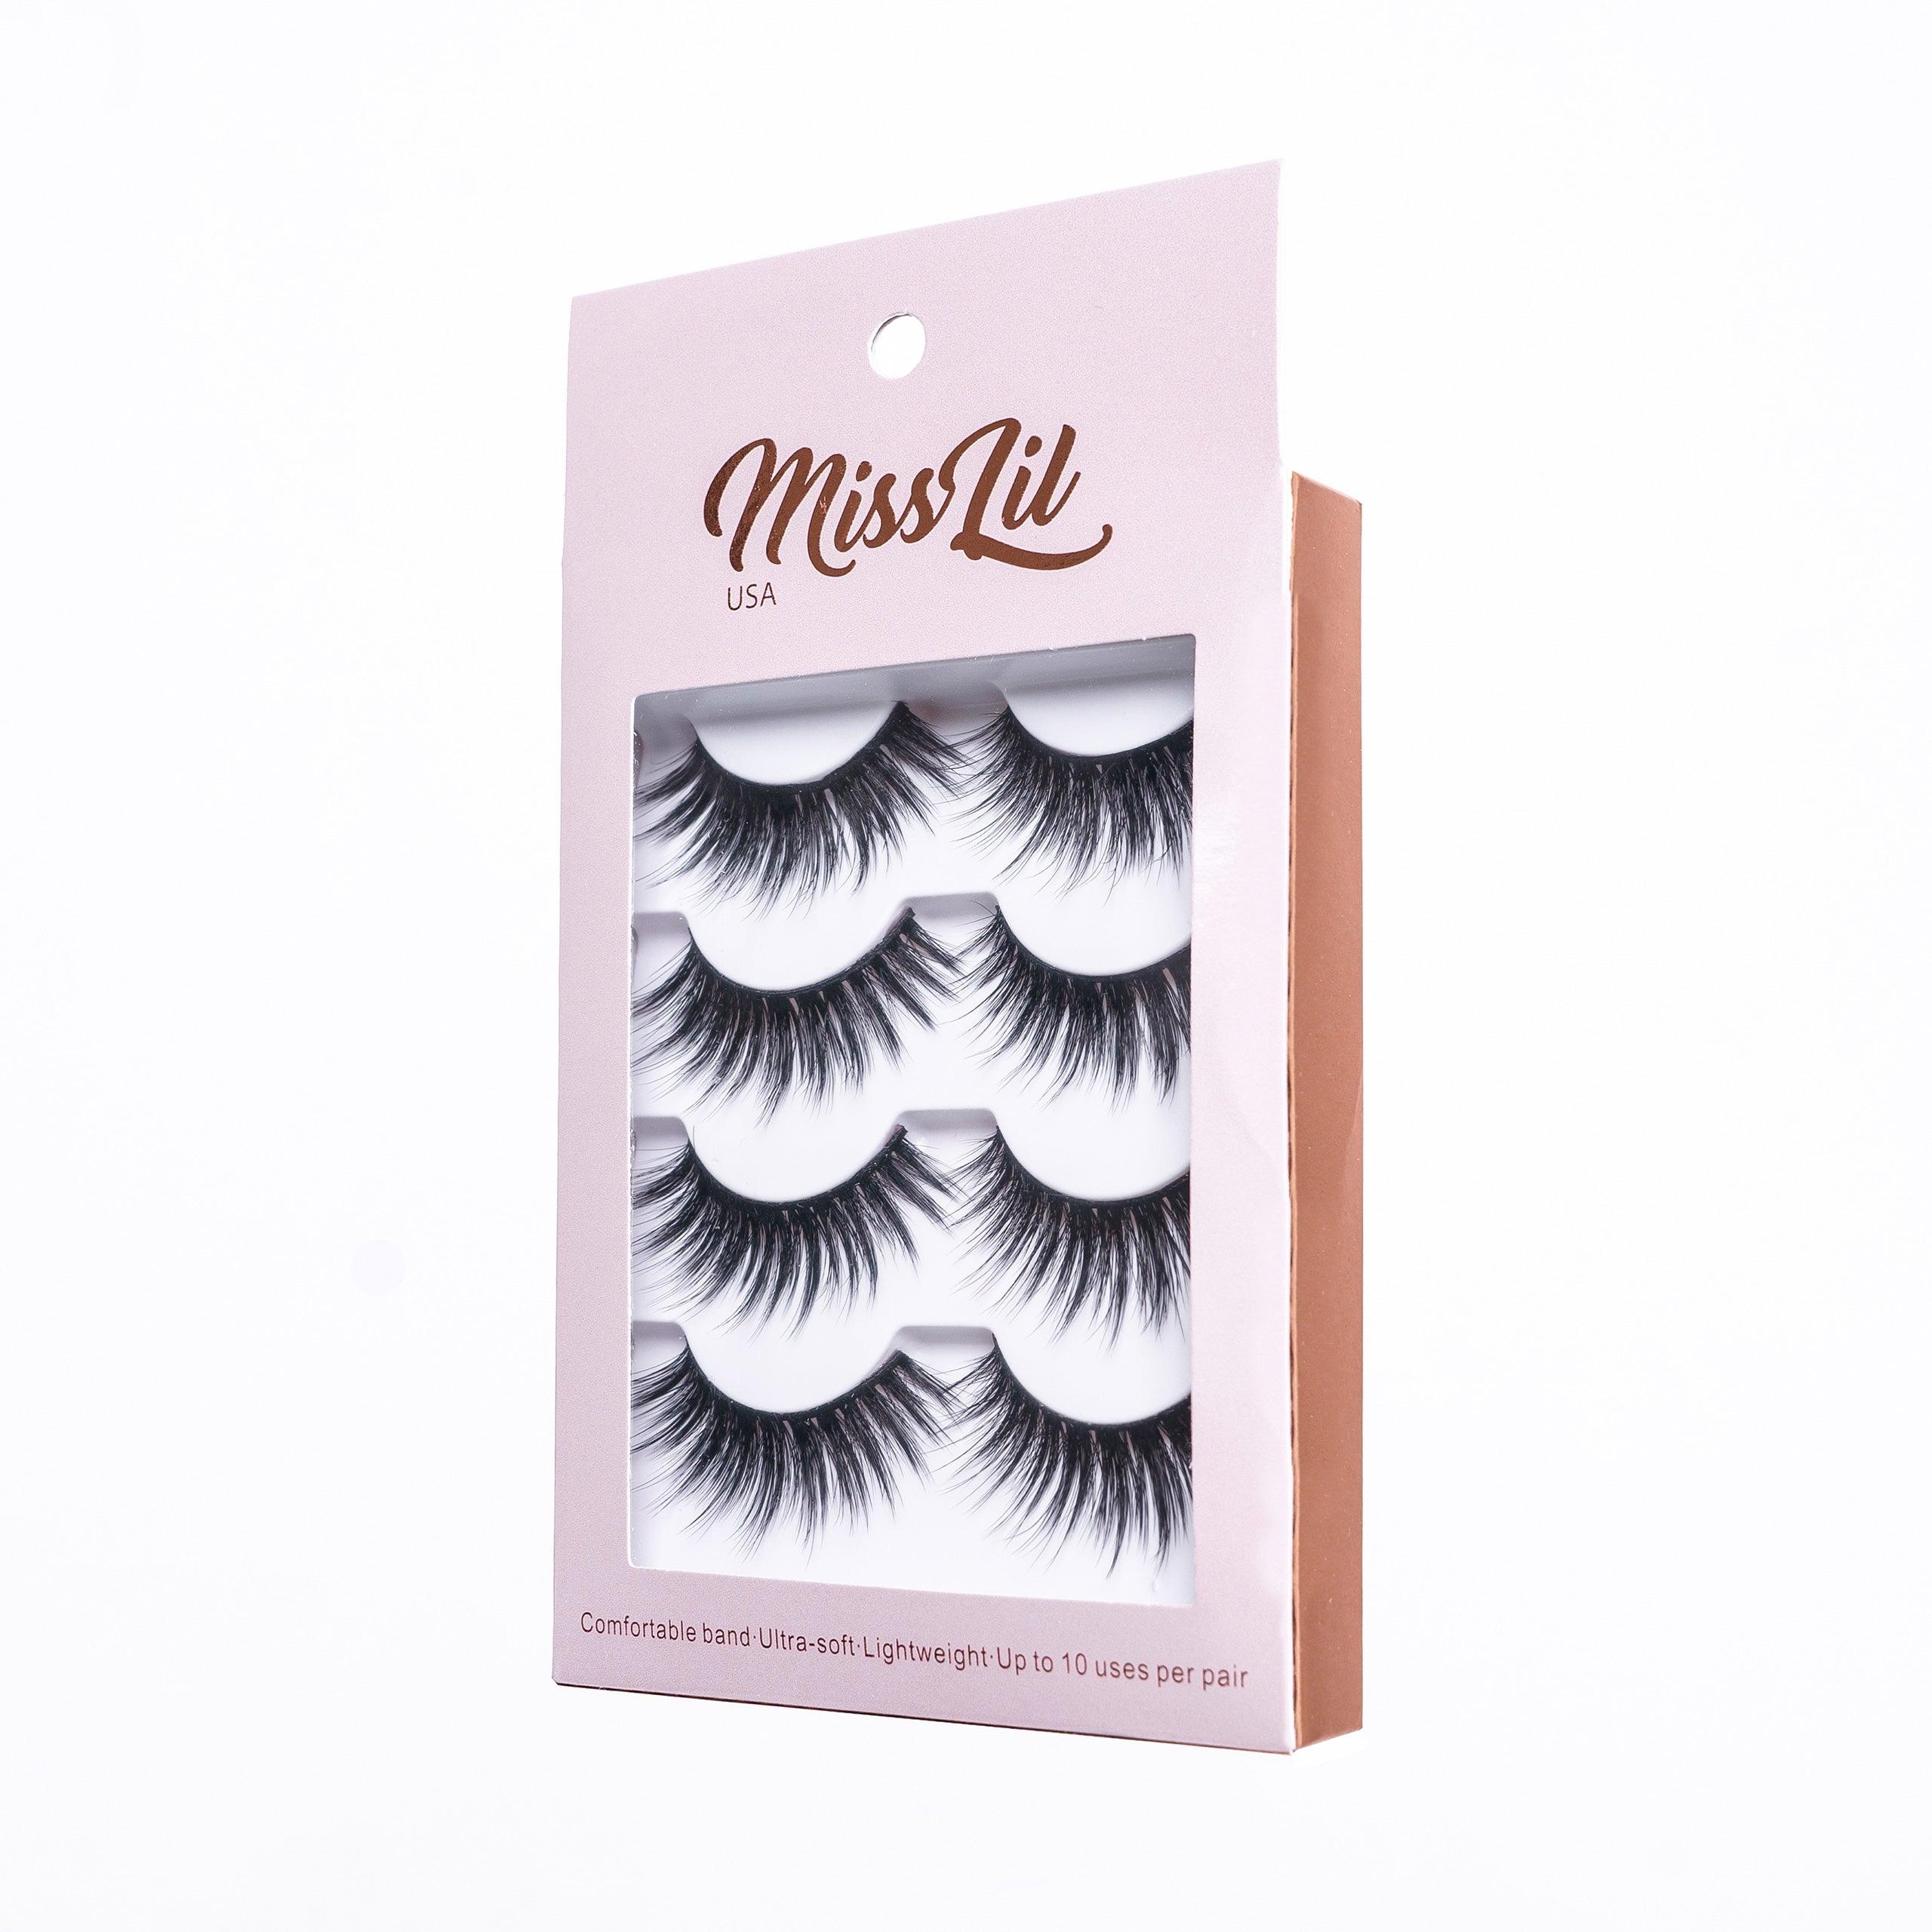 4 Pairs Lashes - Classic Collection #26 - Miss Lil USA